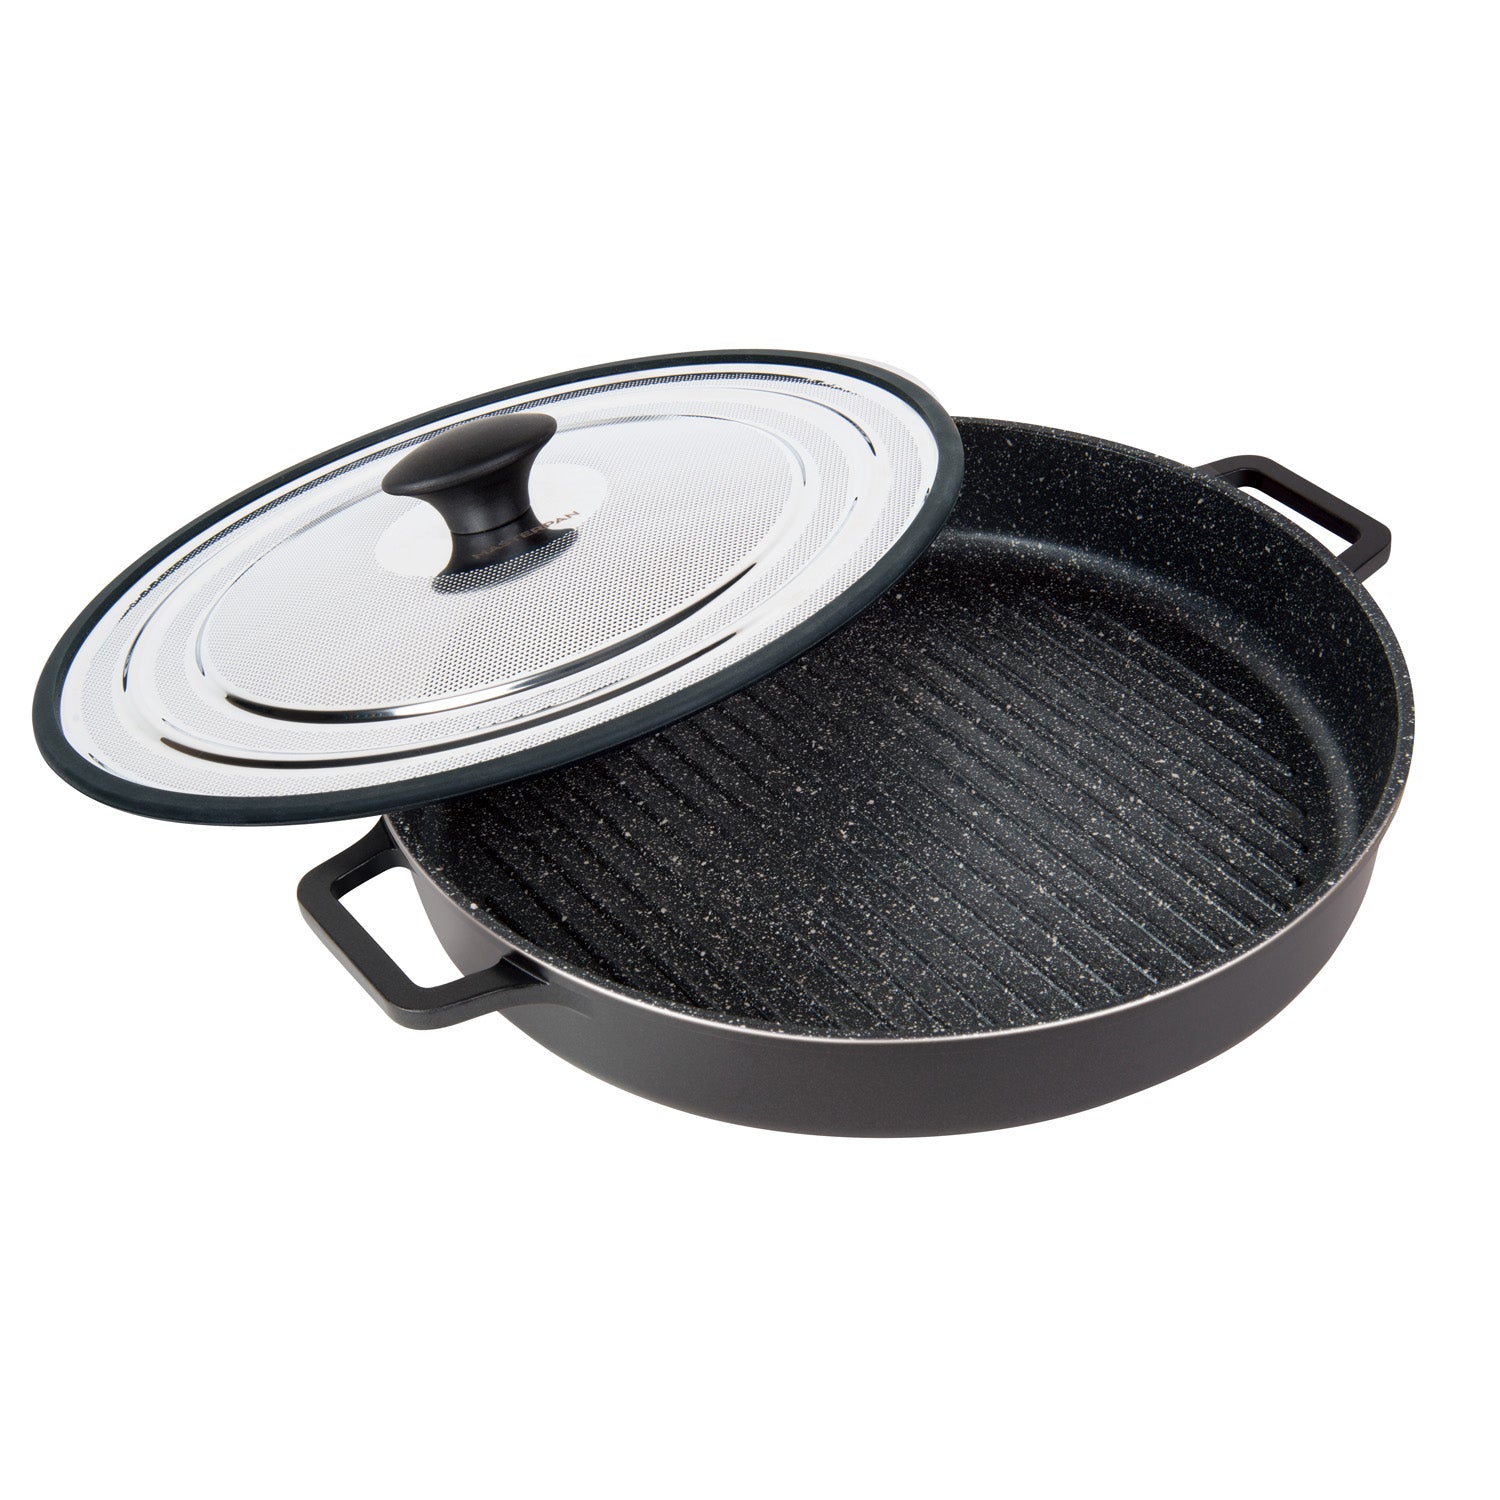 Grill Pan For Stove Top - Best Buy